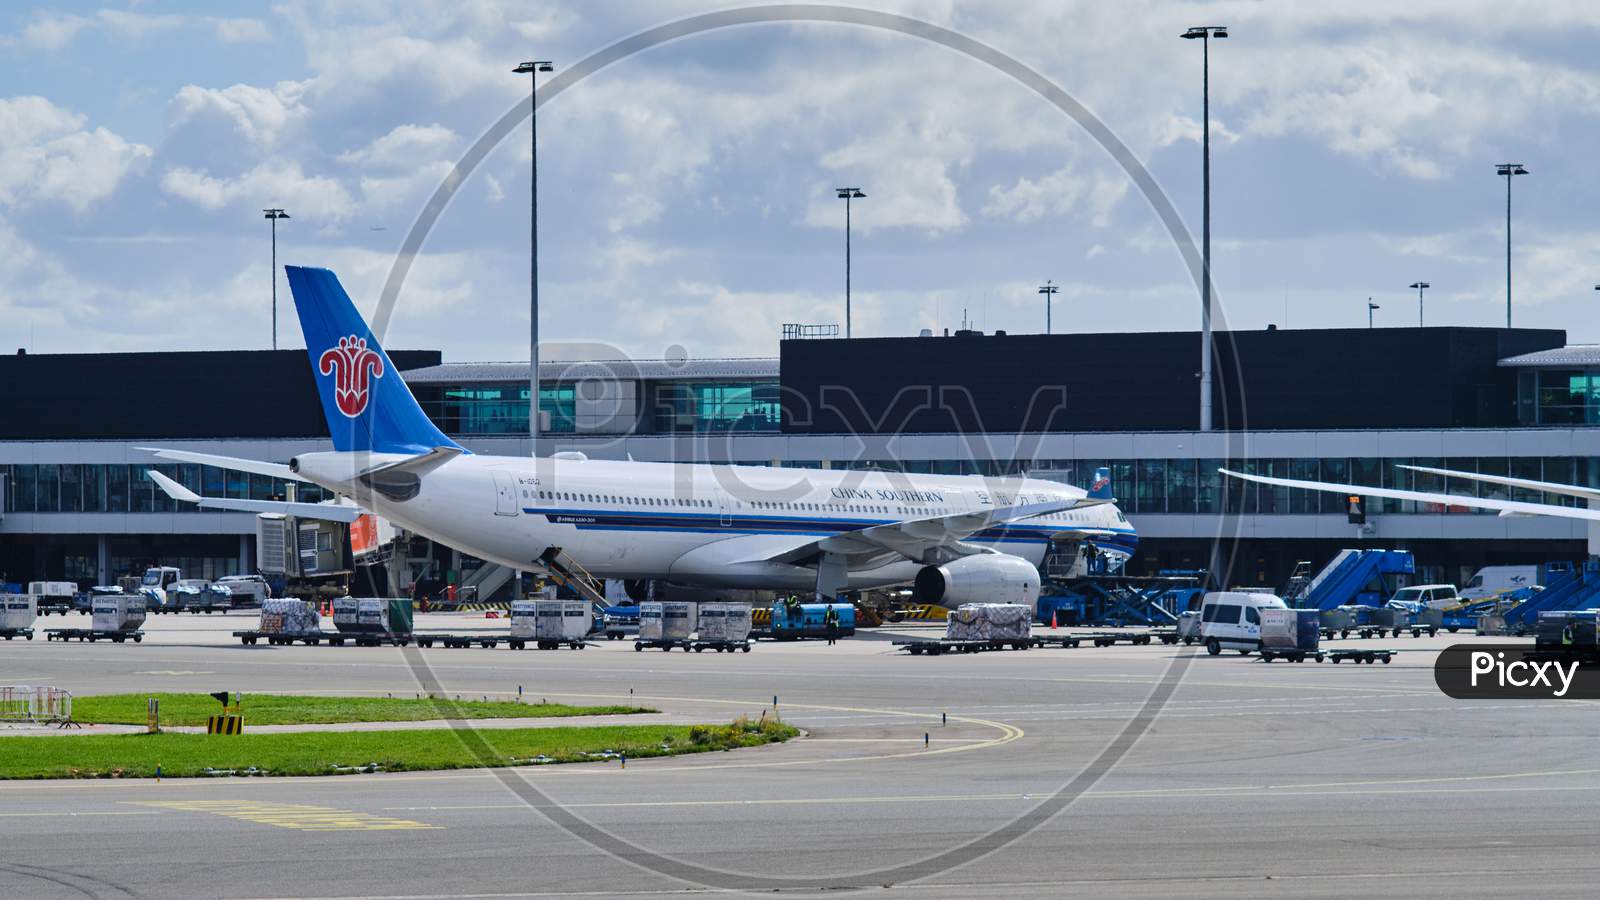 China Southern Airlines Airbus A330-300 At Amsterdam Airport Schiphol In Amsterdam, Netherlands